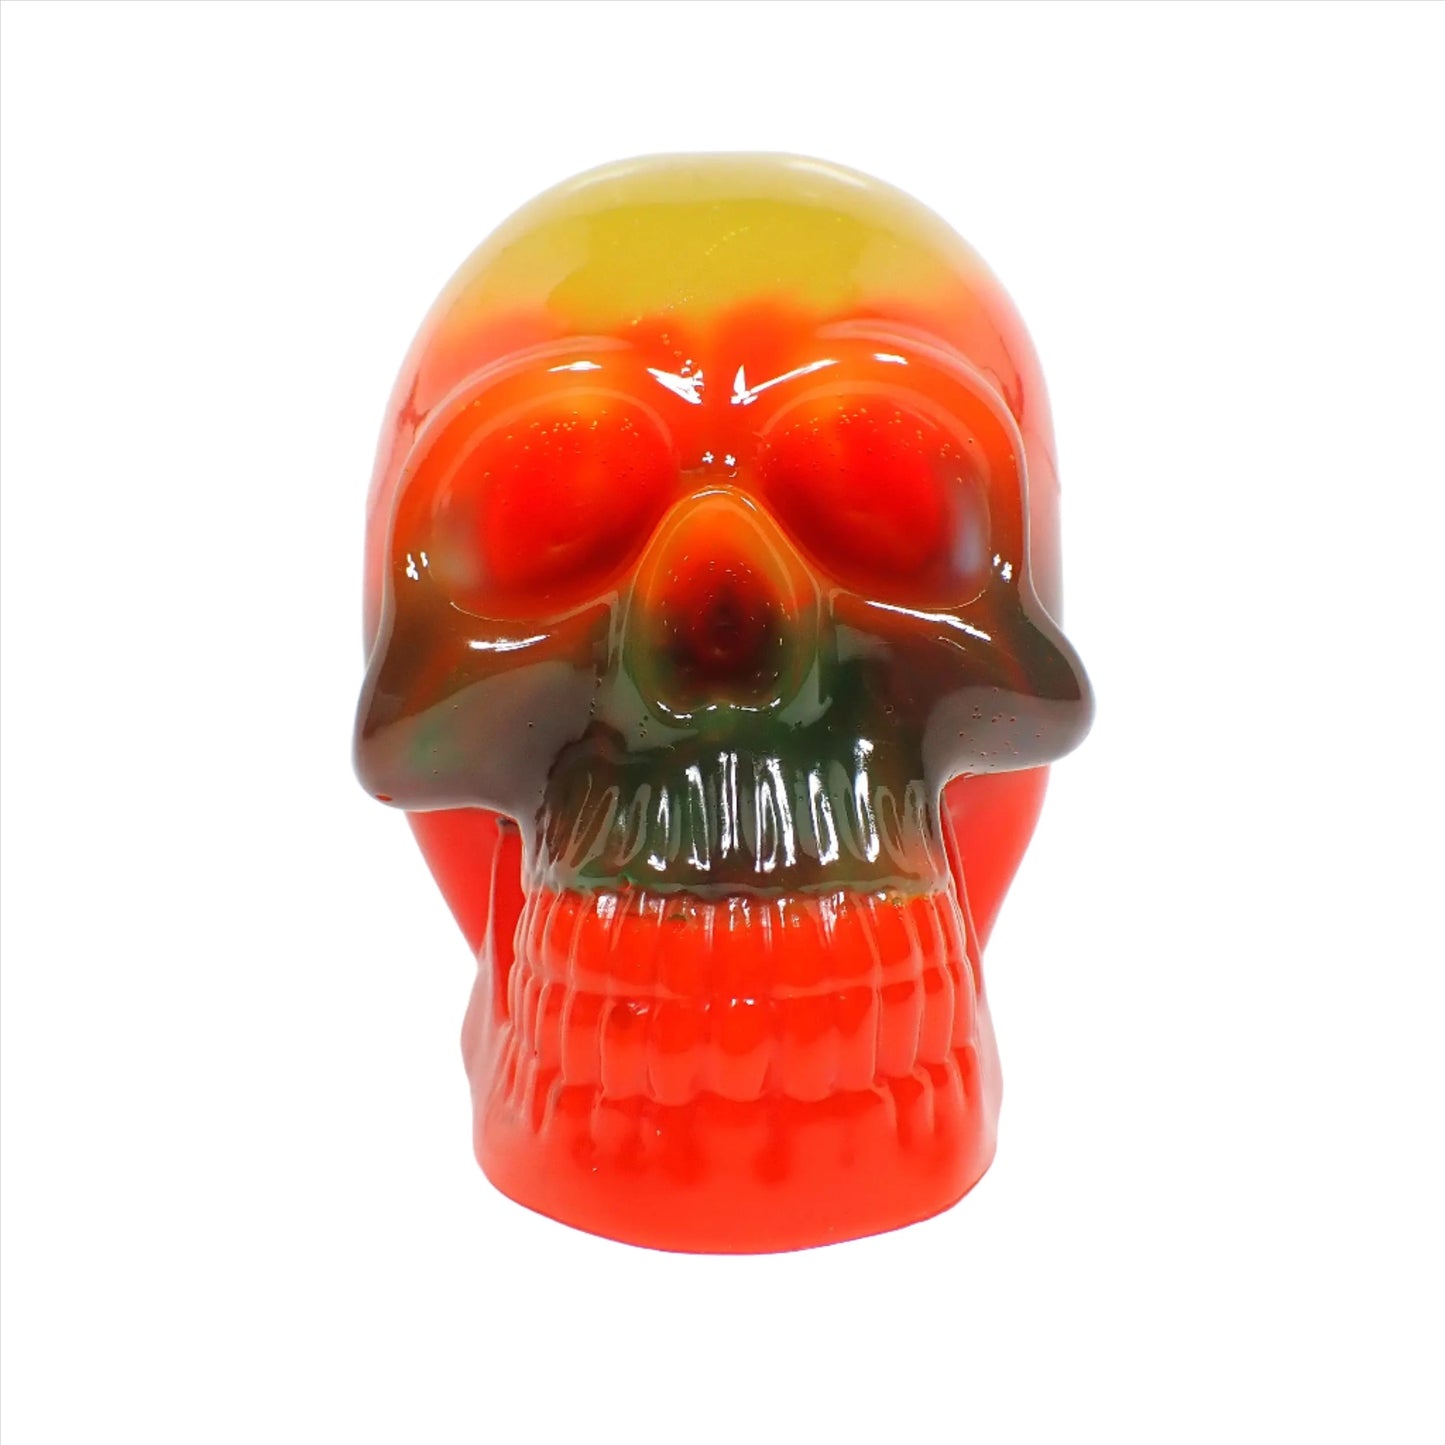 Front view of the handmade resin Neon skull. It has layered bands of color and in the photo showing regular lighting it goes from yellow, to orange, to green, to a brighter orange color.